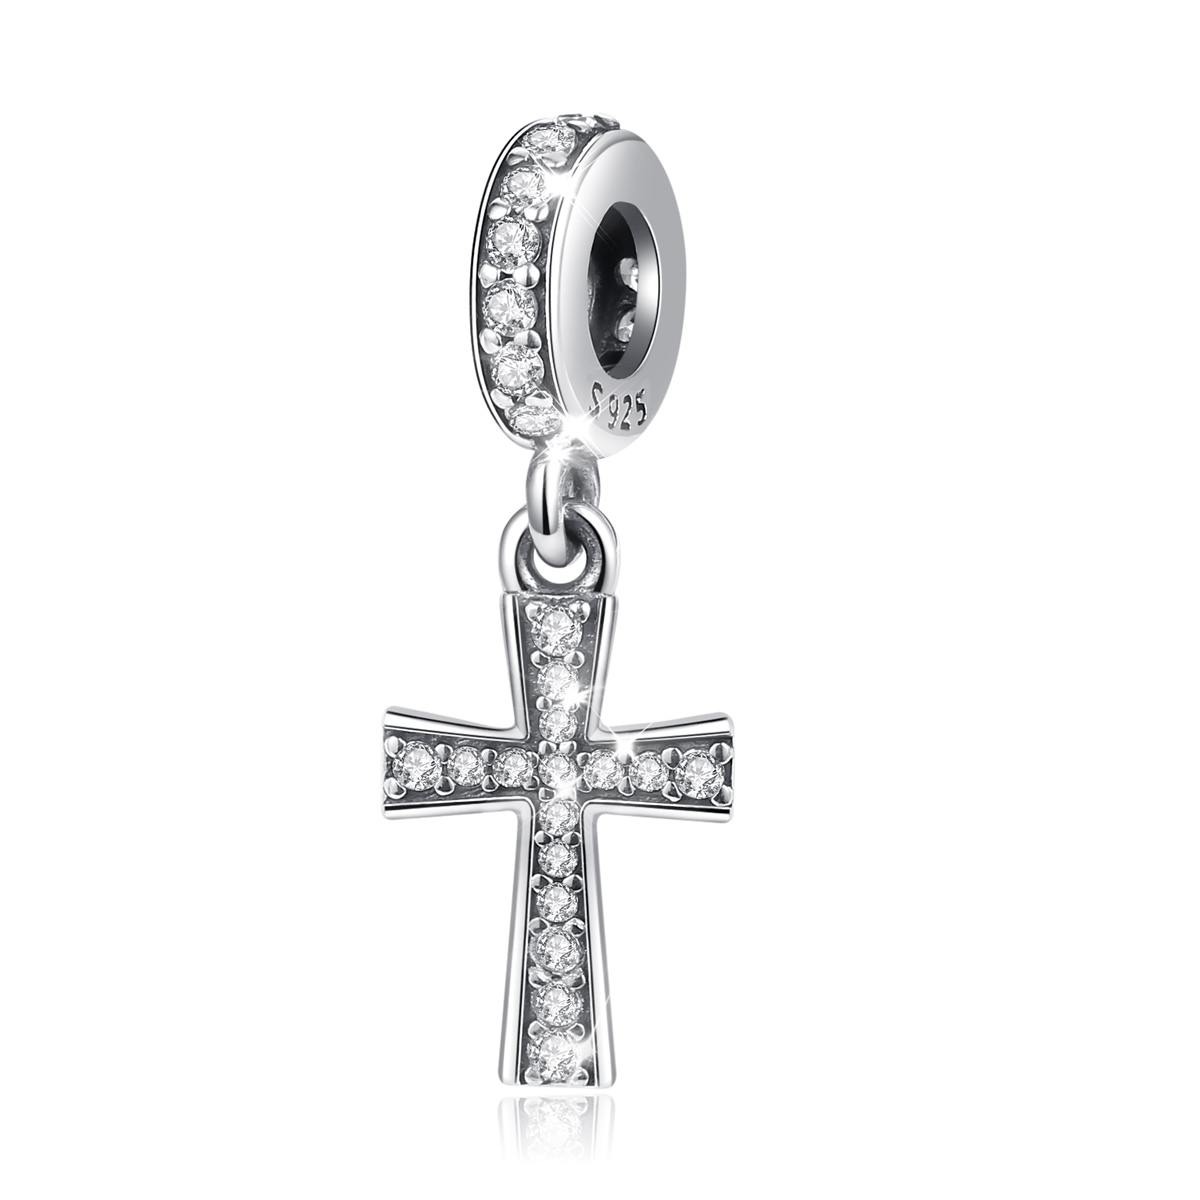 Merryshine Jewelry Presents: The Elegance of 925 Sterling Silver Cross Charms